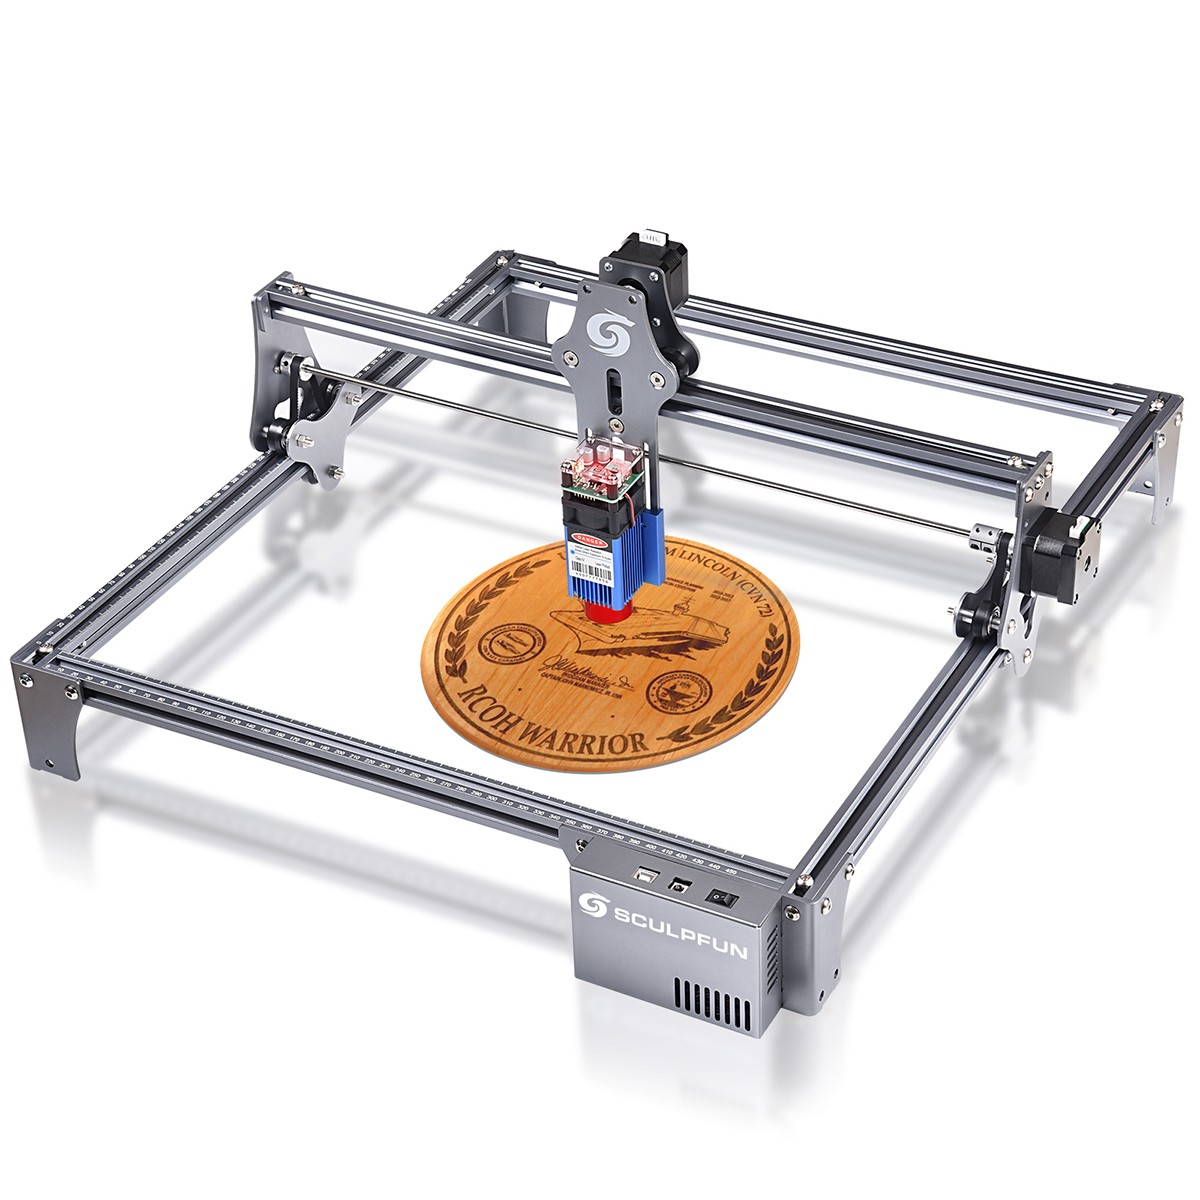 Sculpfun s9 PRO Laser Engraver - guide, settings, review, upgraded